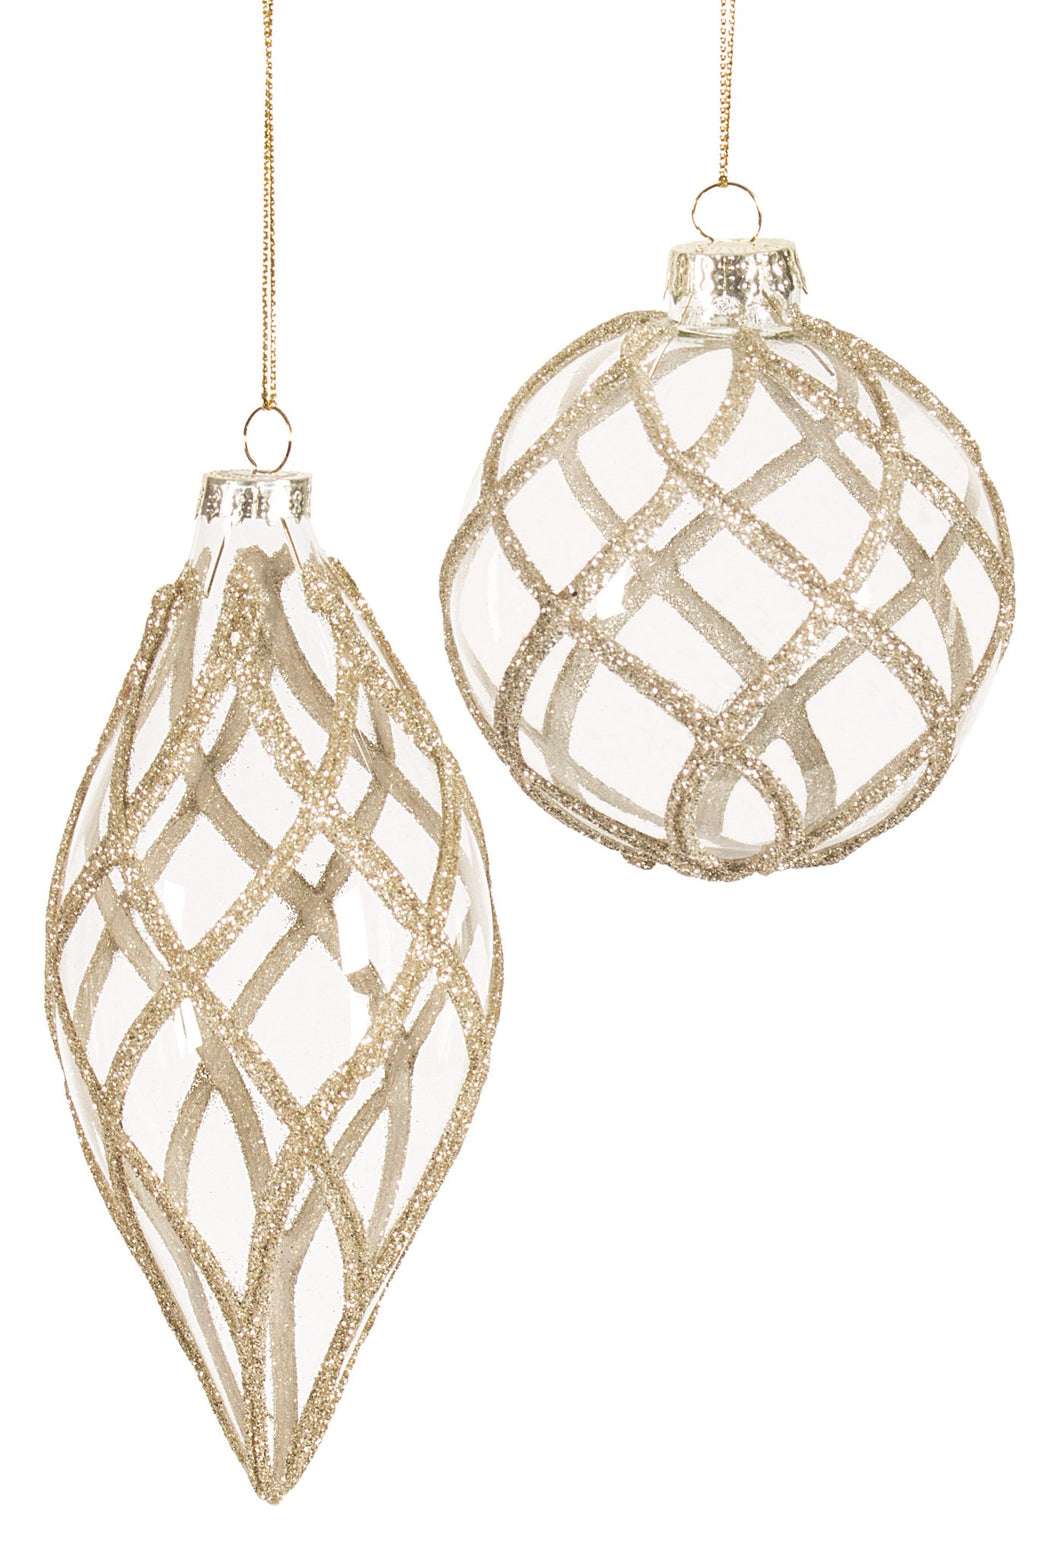 Gold Patterned Glass Ball Ornament